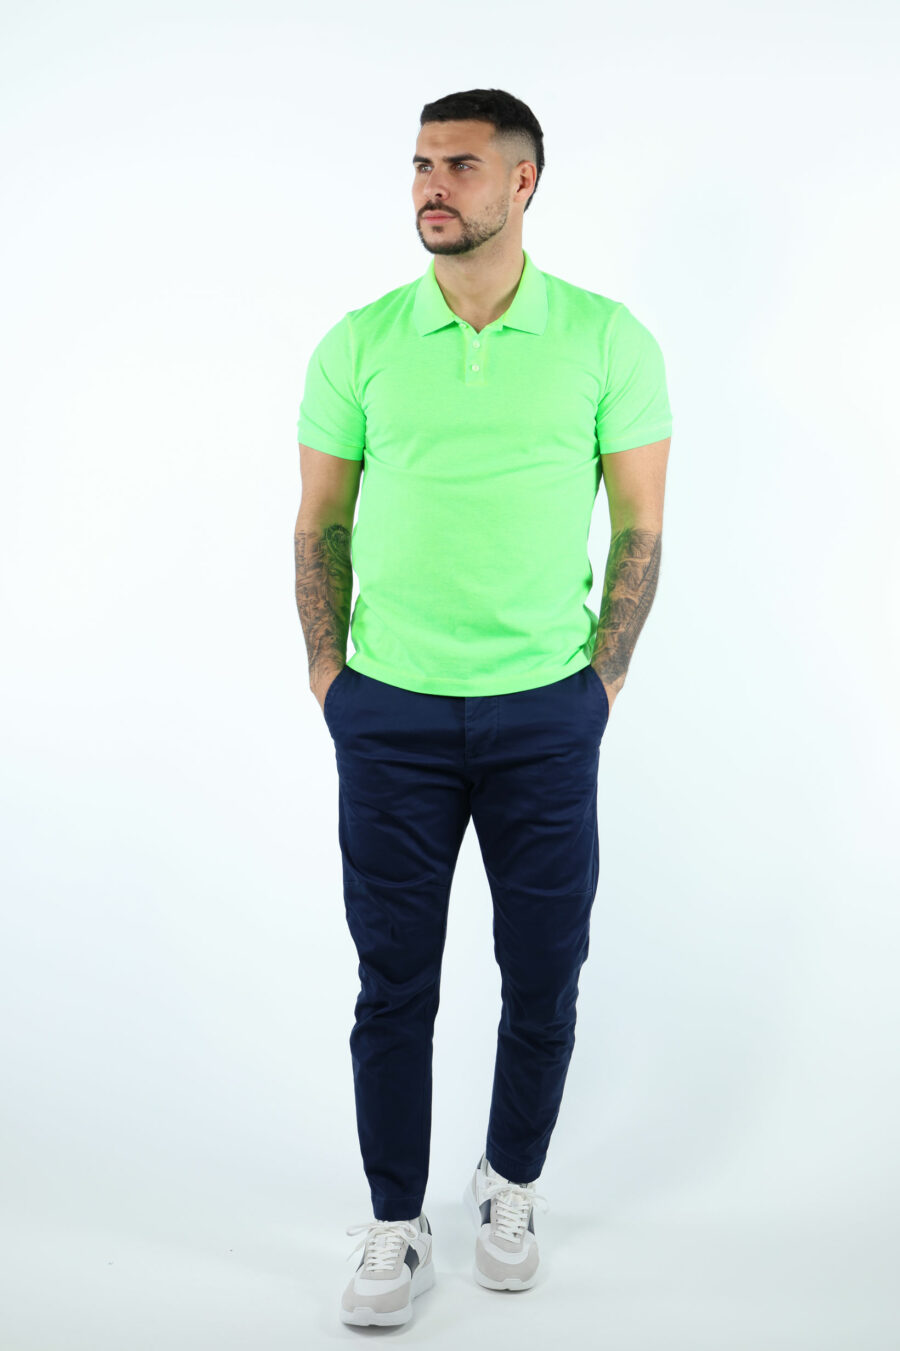 Neon green "tennis fit" polo shirt with "icon" logo on the back - 106696